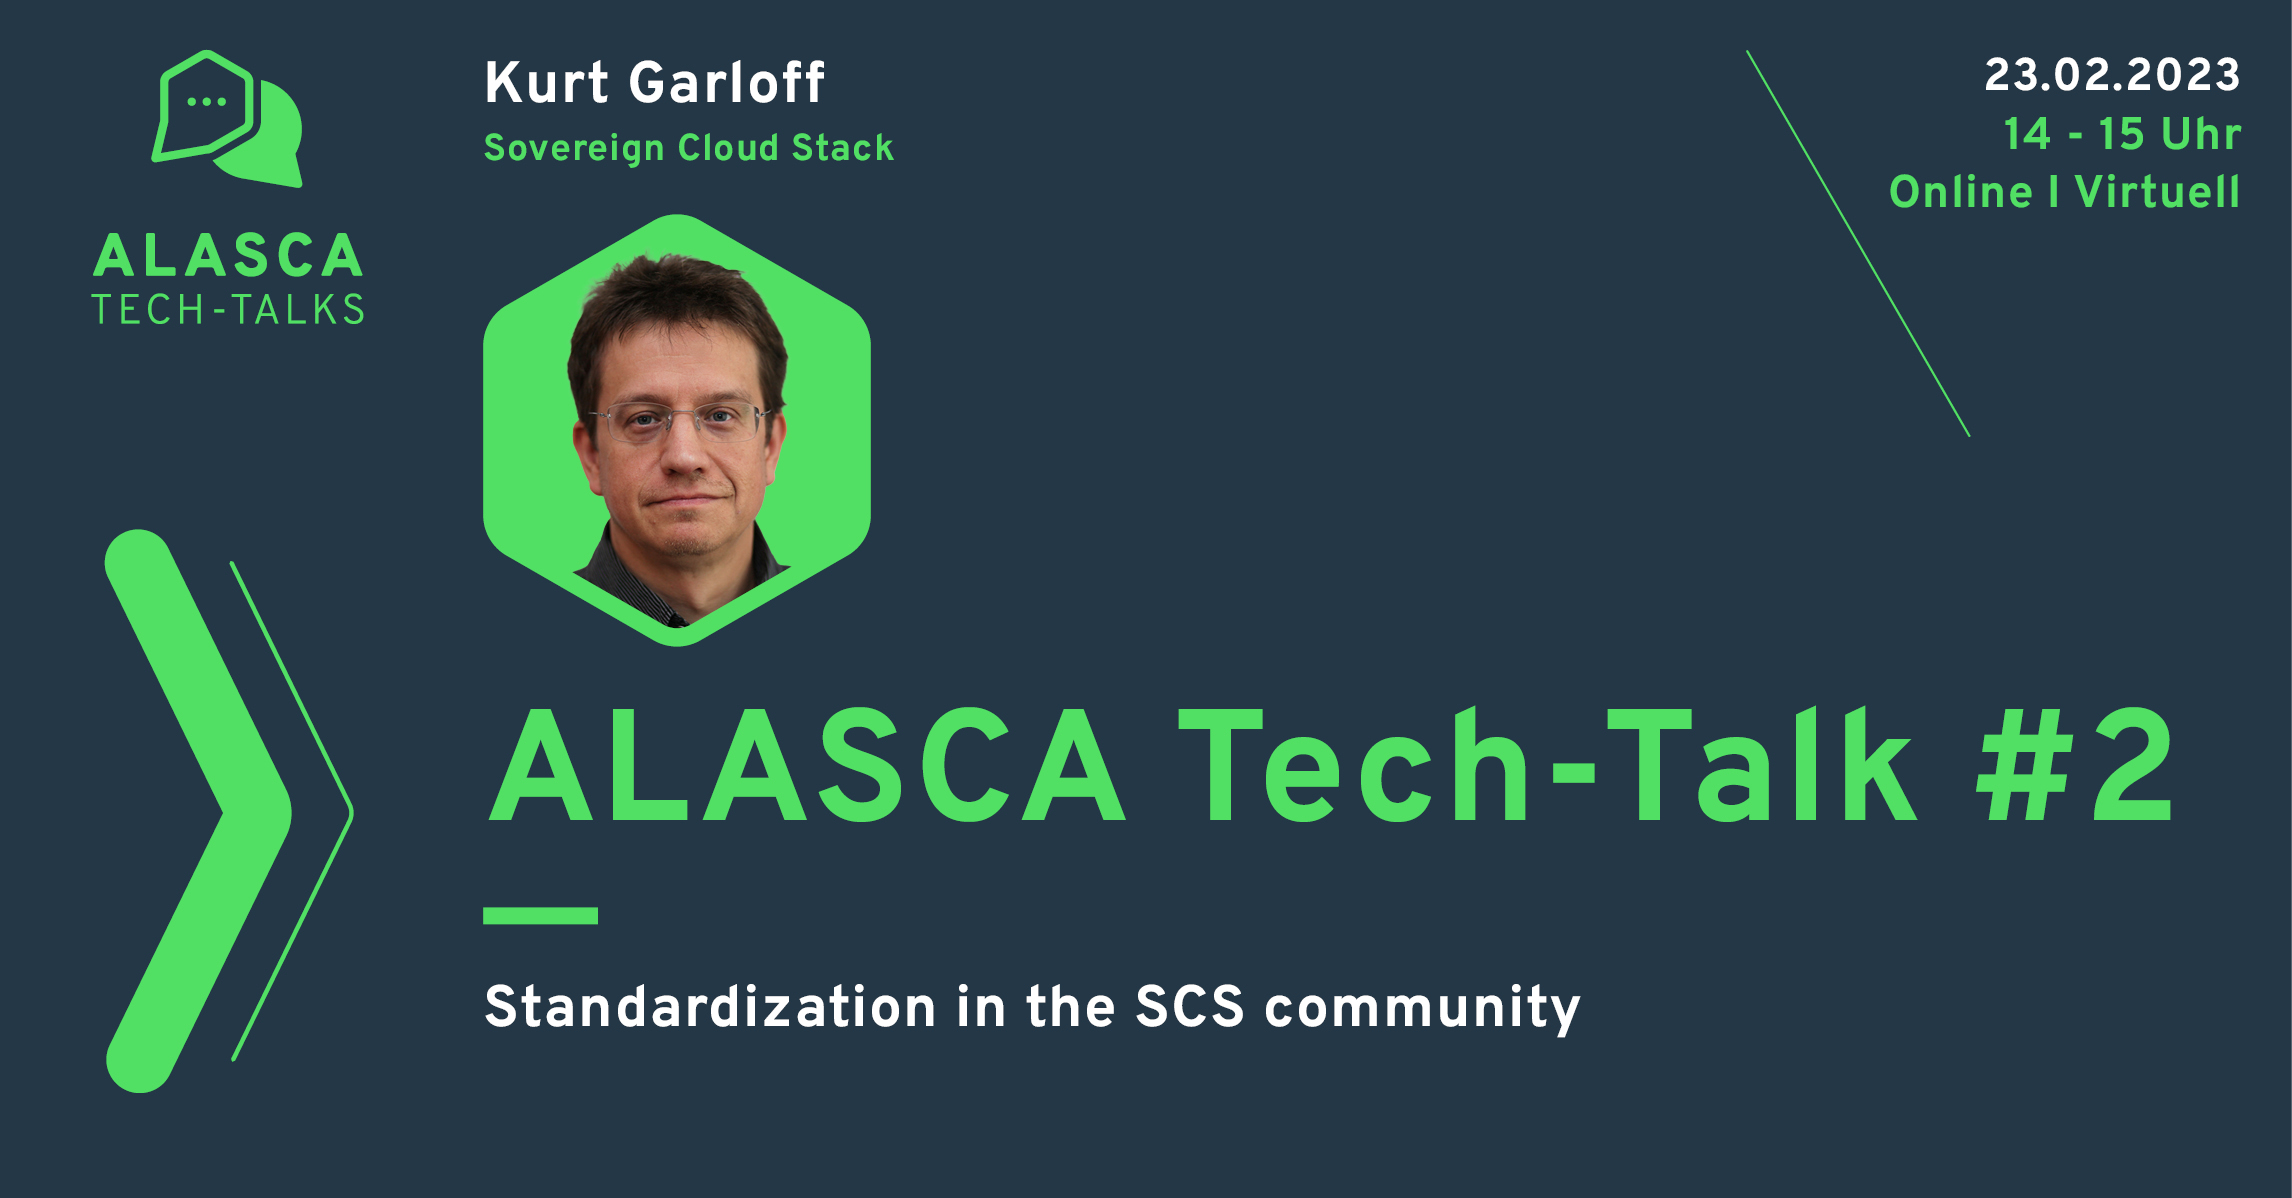 ALASCA | Tech-Tak #2 | Sovereign Cloud Stack (SCS): "Standardization in the SCS community".